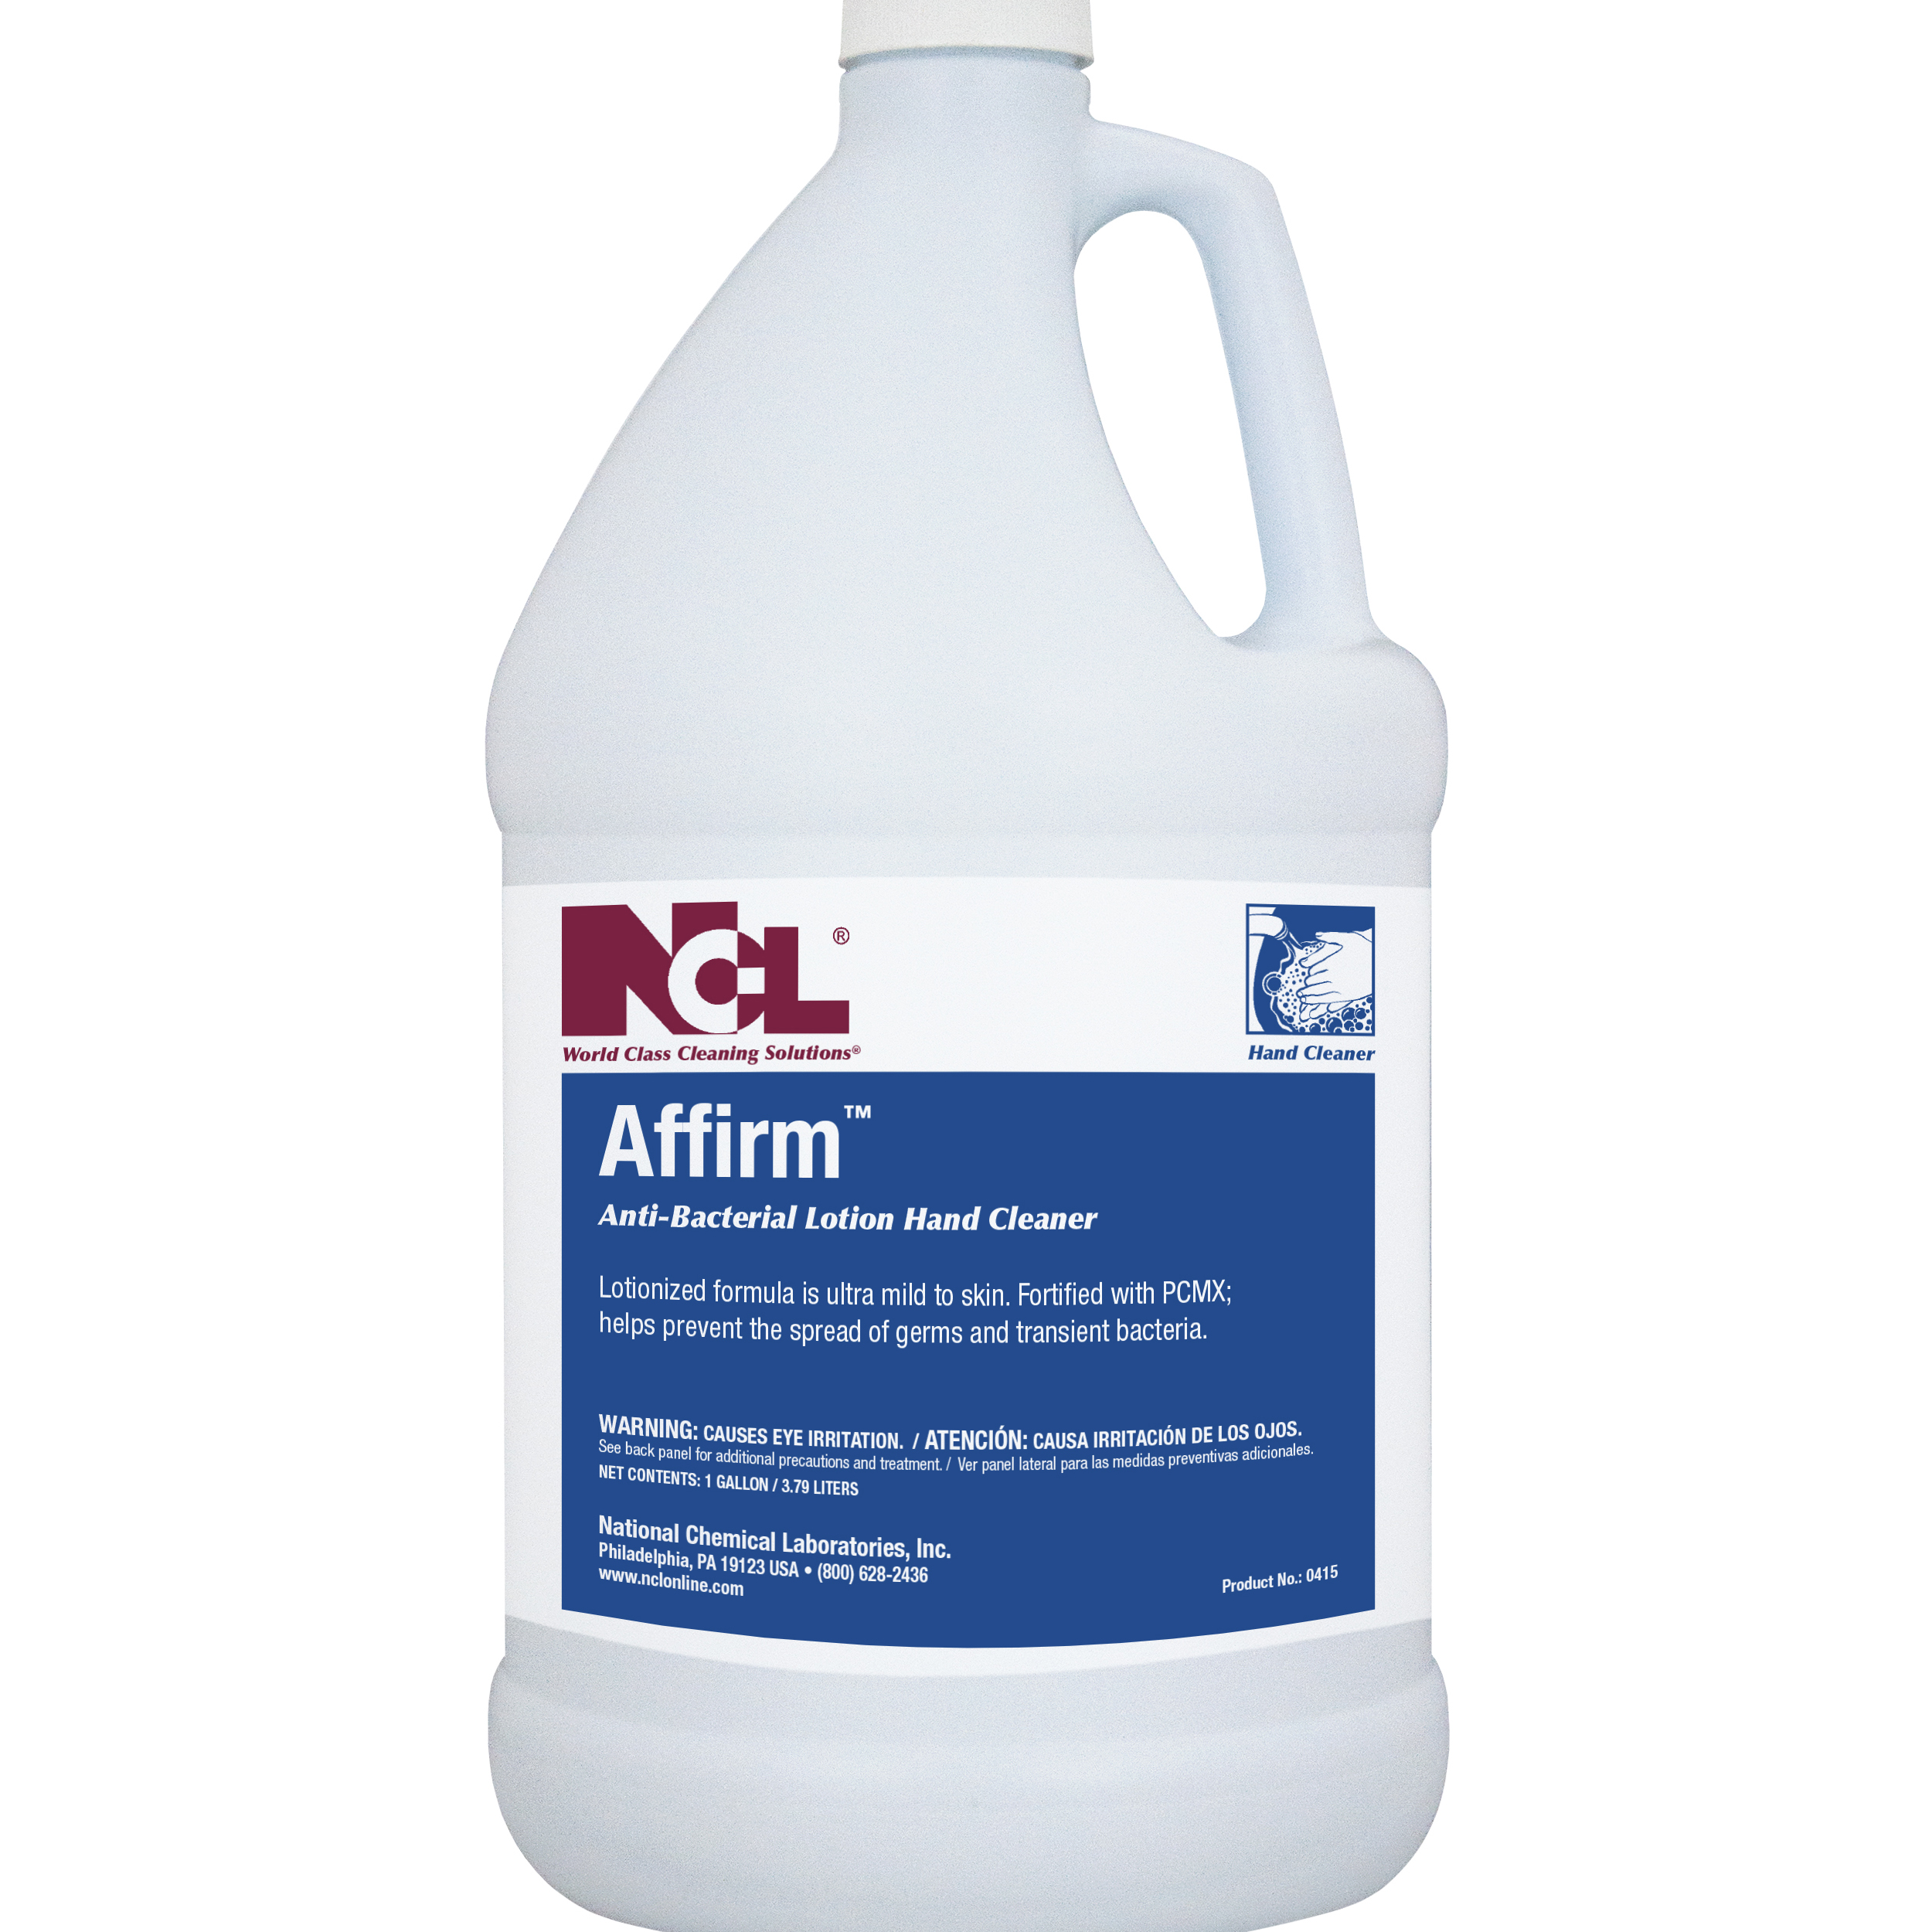  AFFIRM Anti-Bacterial Lotion Hand Cleaner 4/1 Gal. Case (NCL0415-29) 